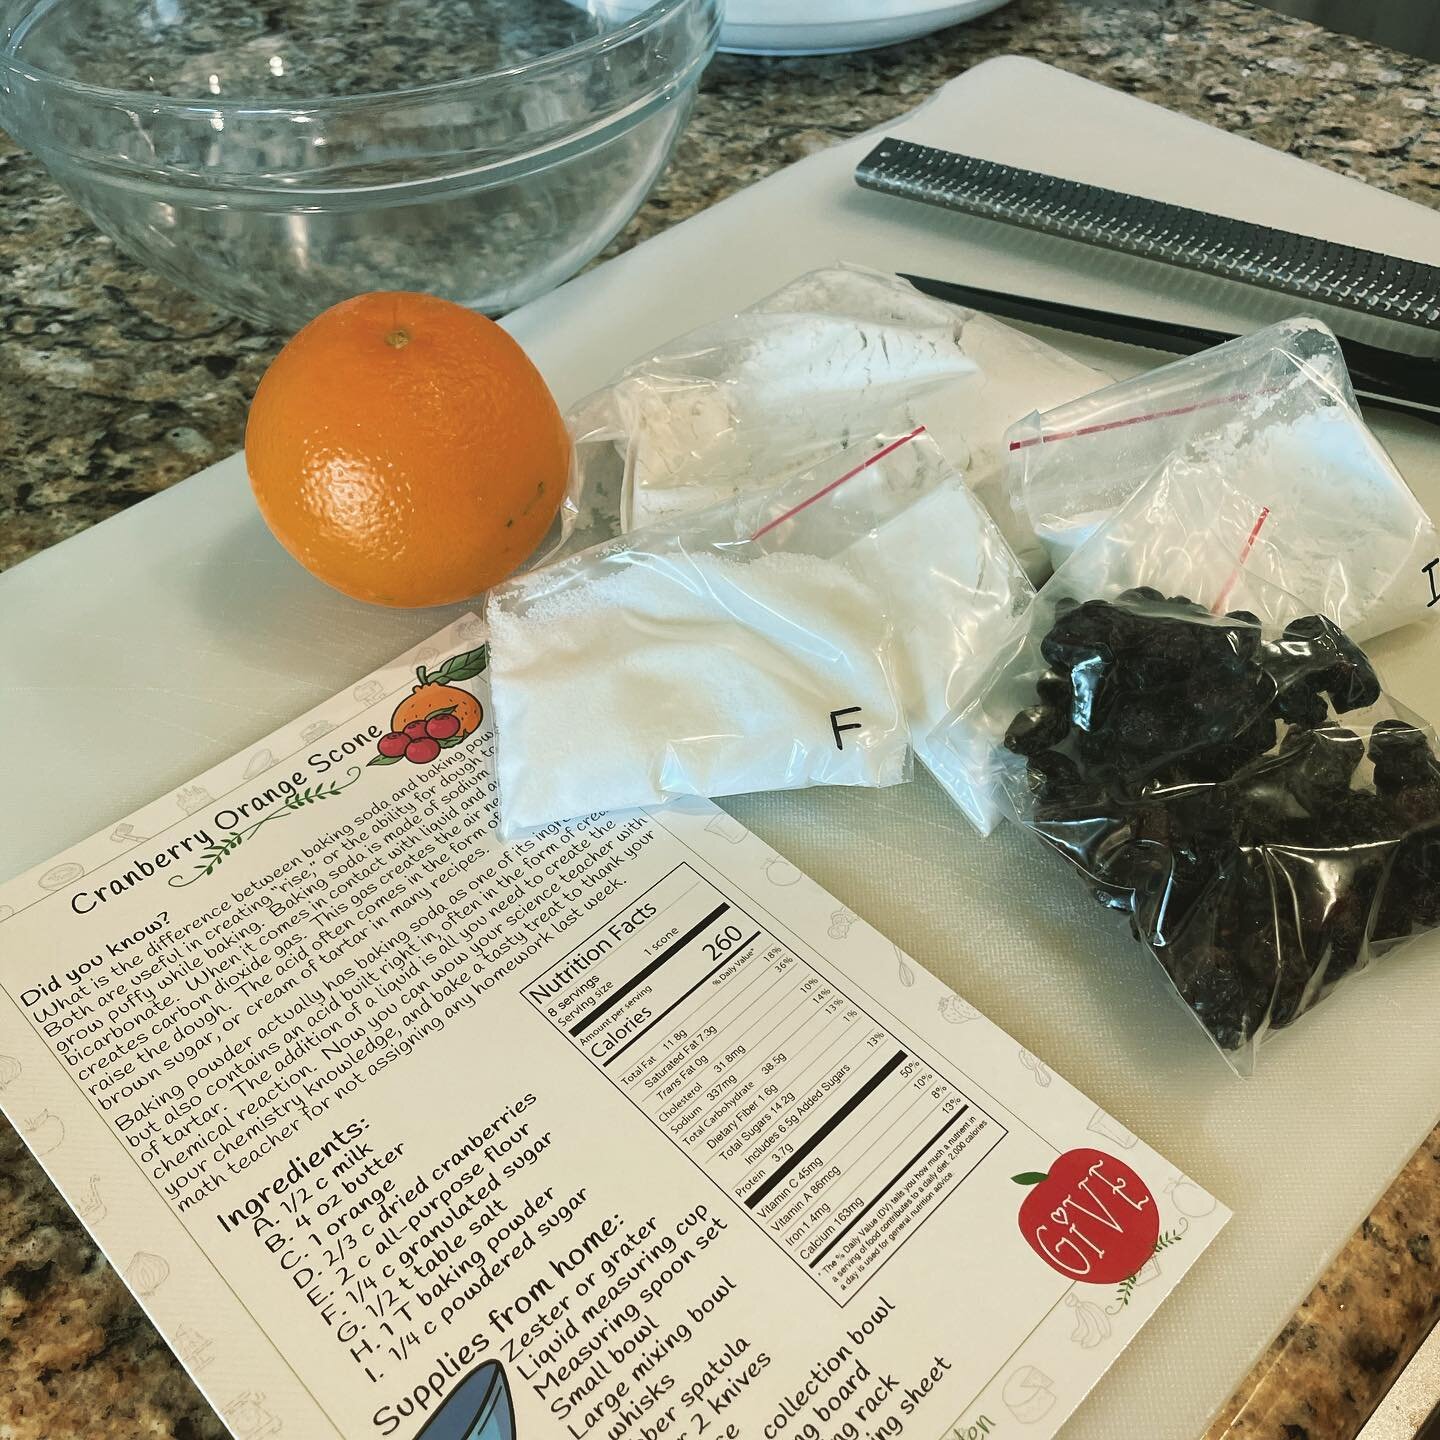 Preparing for today&rsquo;s Social Cooking Group!  Cranberry Orange Scones are on the menu. #kidswithautismcan #azfoodies #yum #cookingisfun #scones